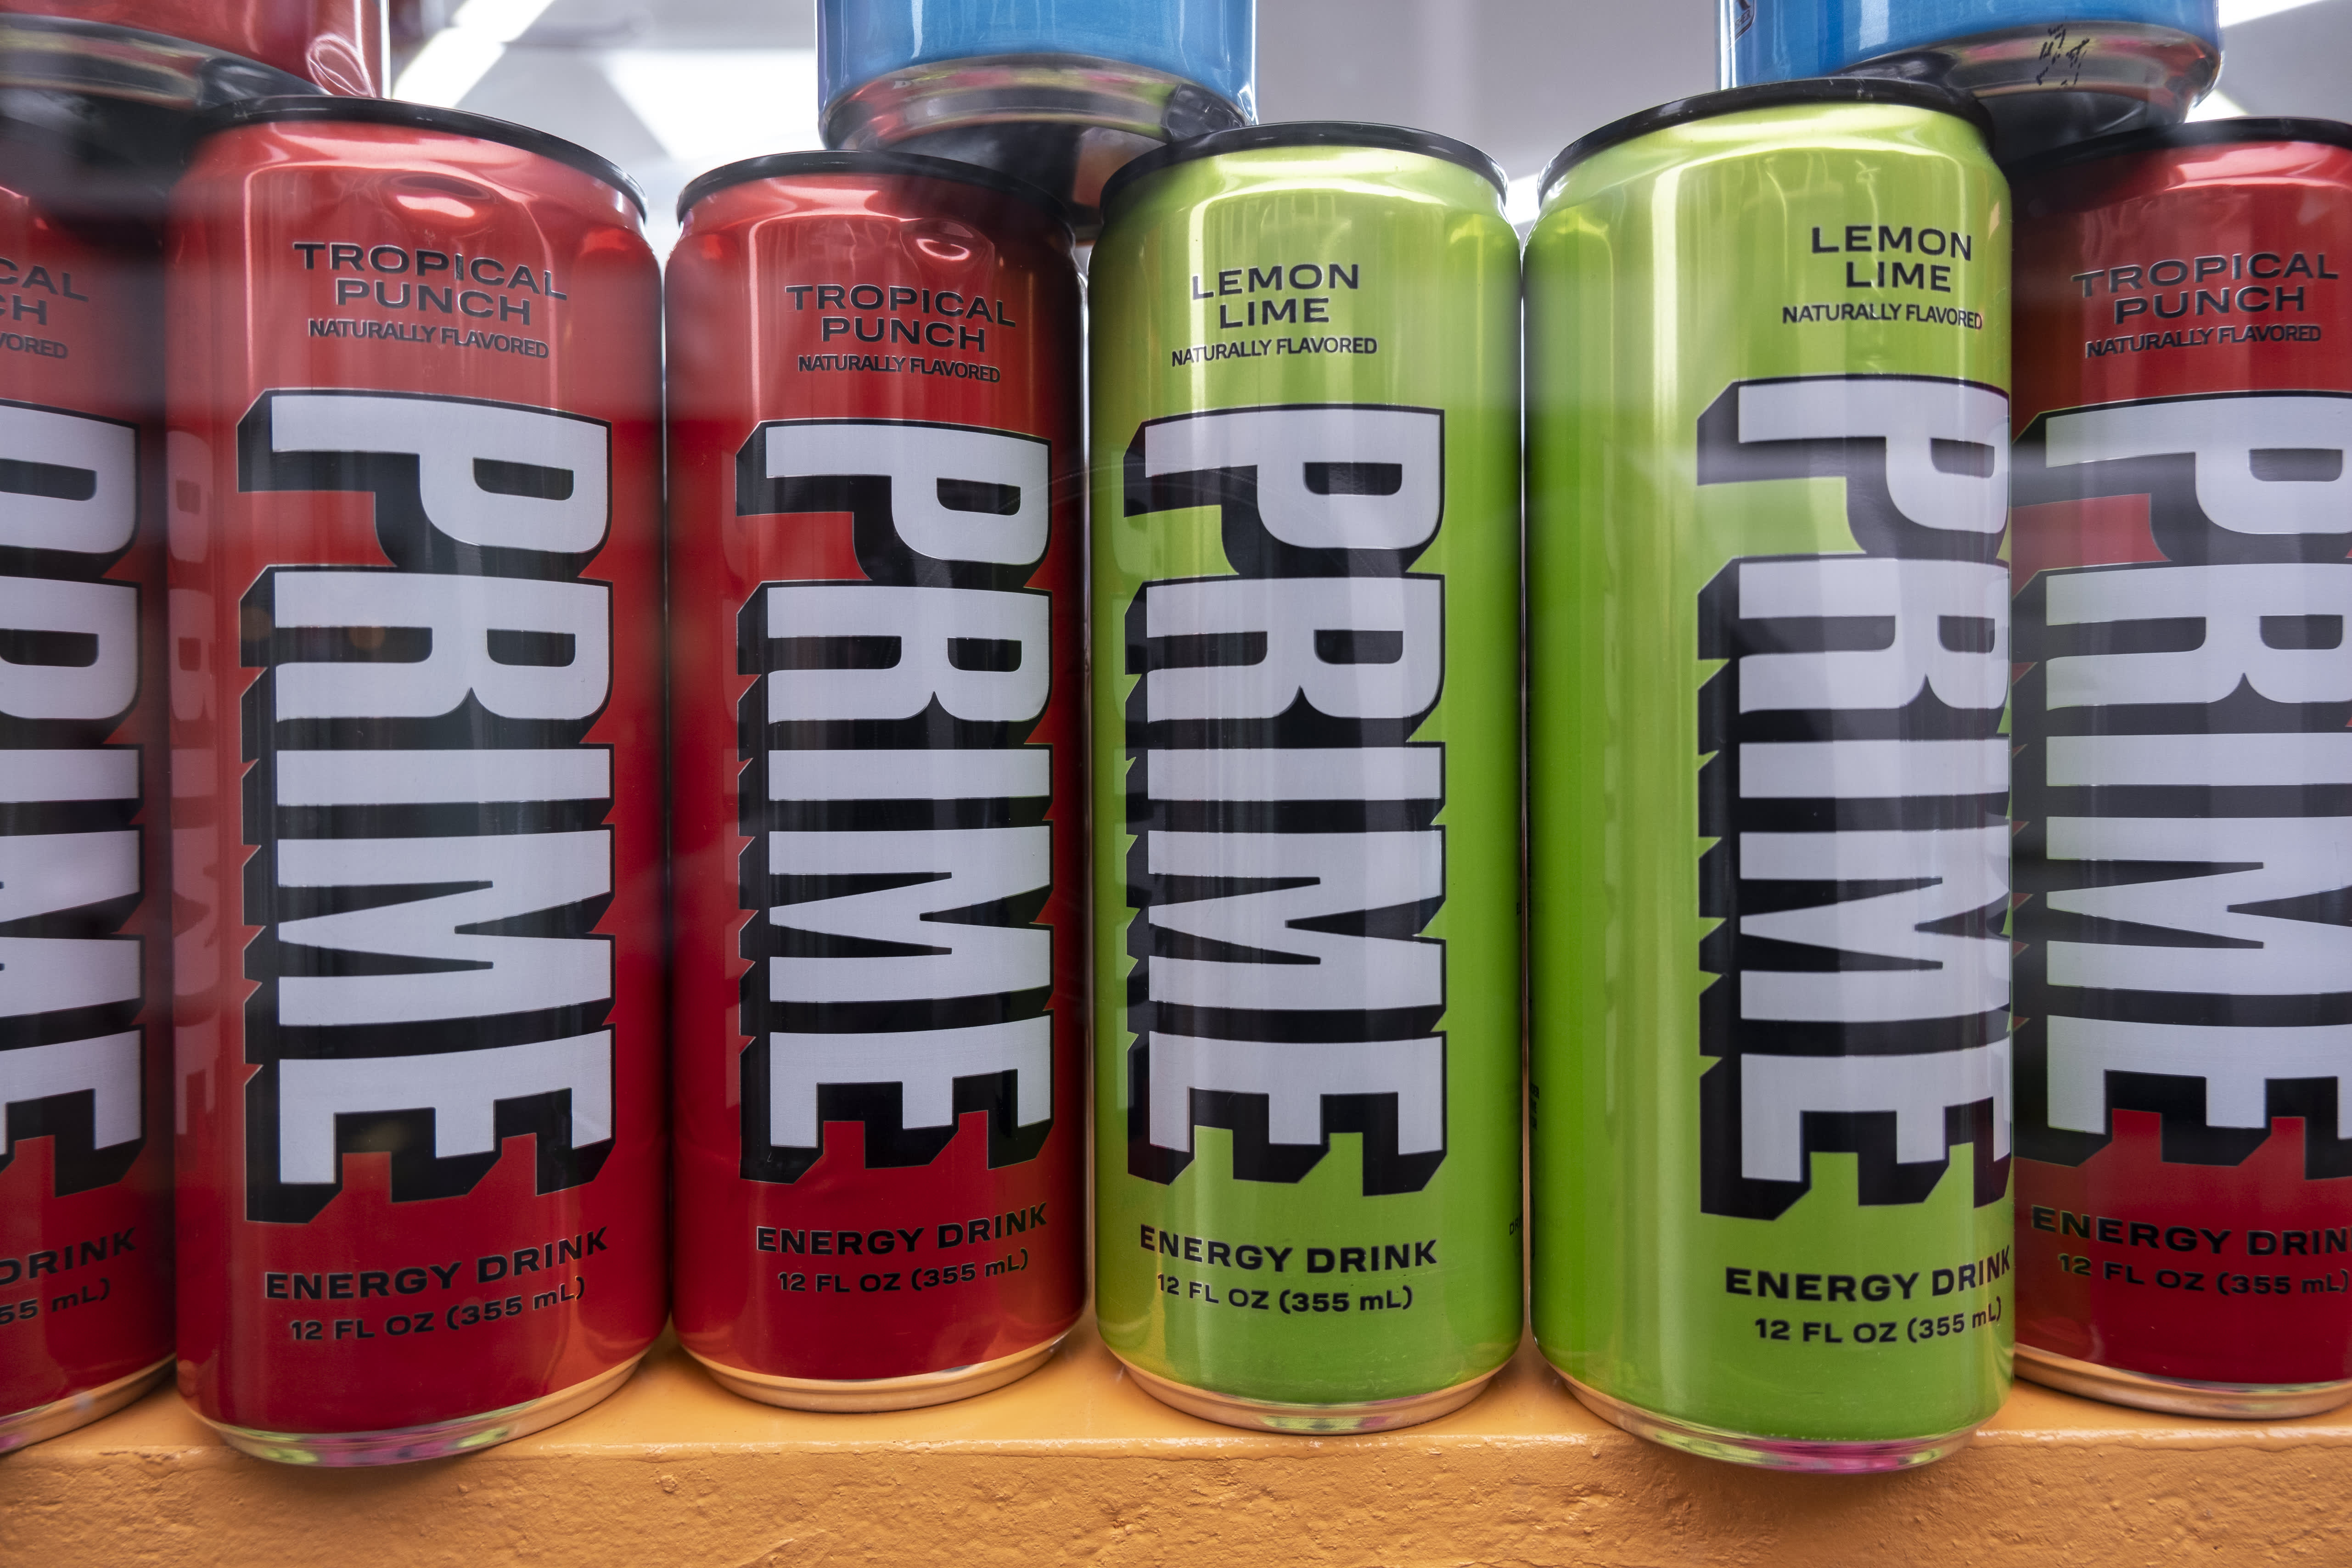 Popular Prime energy drink by Logan Paul that exceeds Canada's